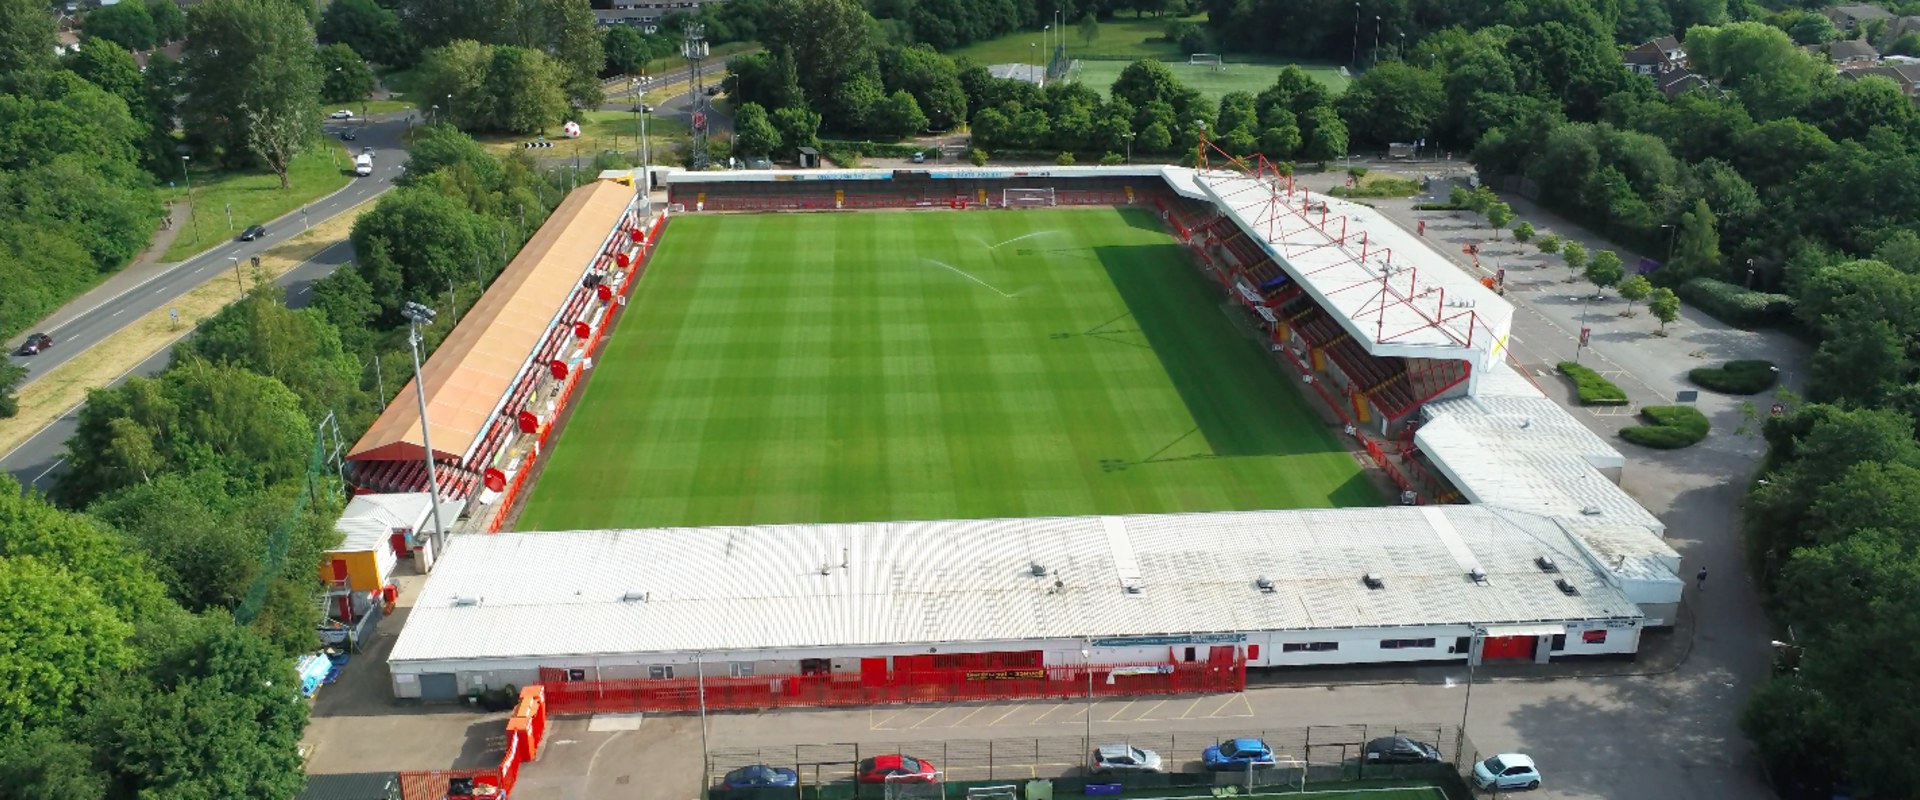 Crawley Town FC Ground Football Matches